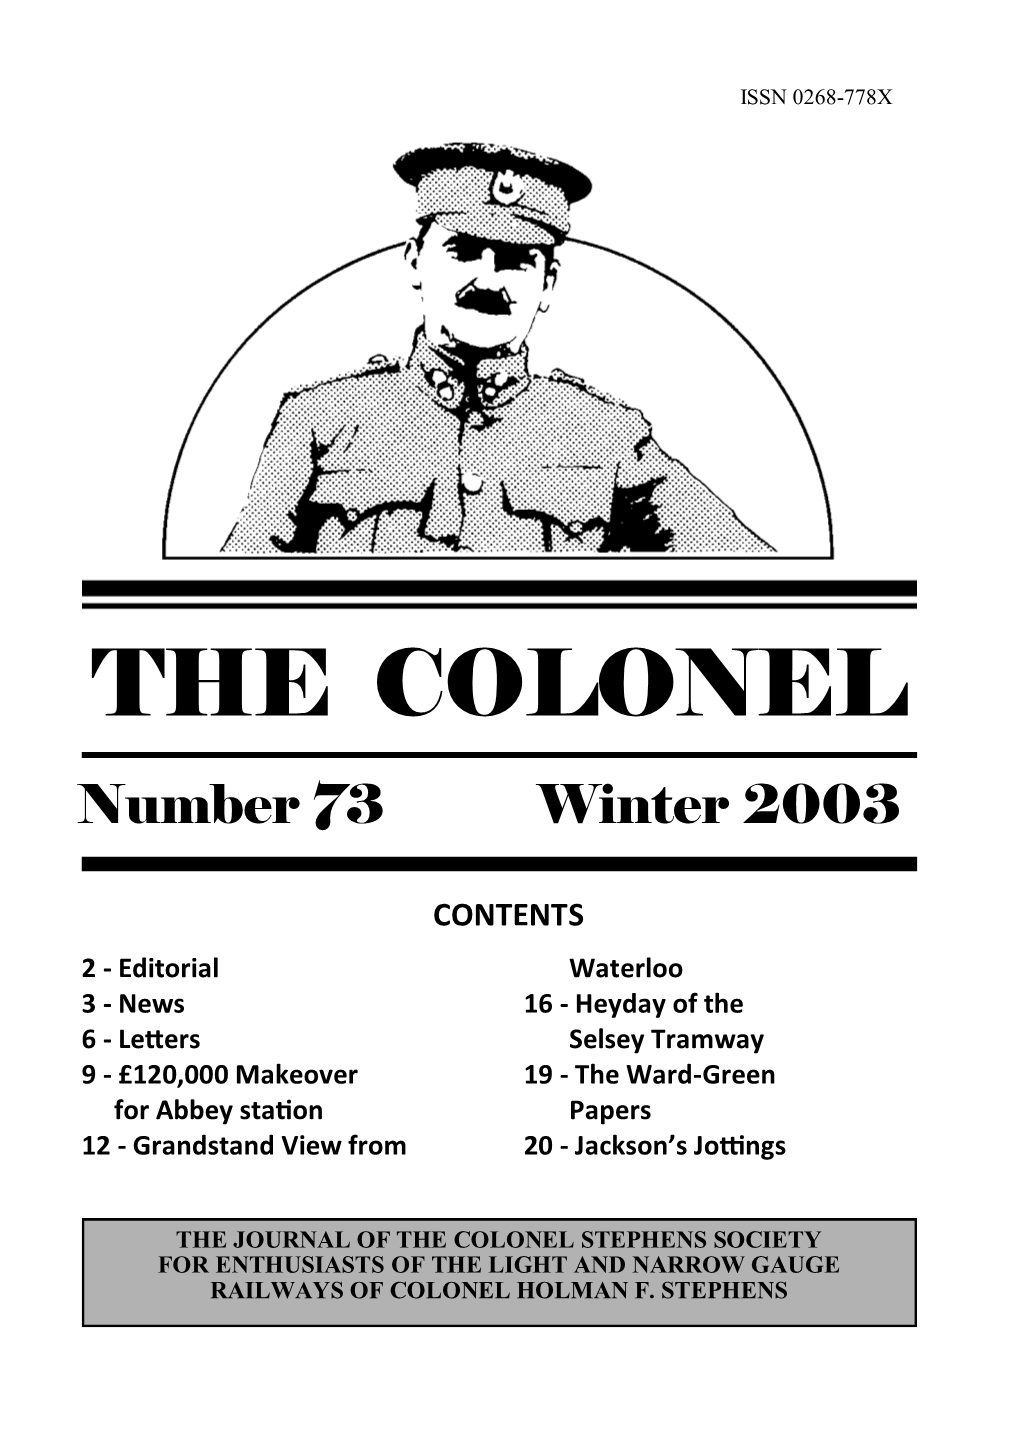 The Colonel 73 Issn 0268-778X1